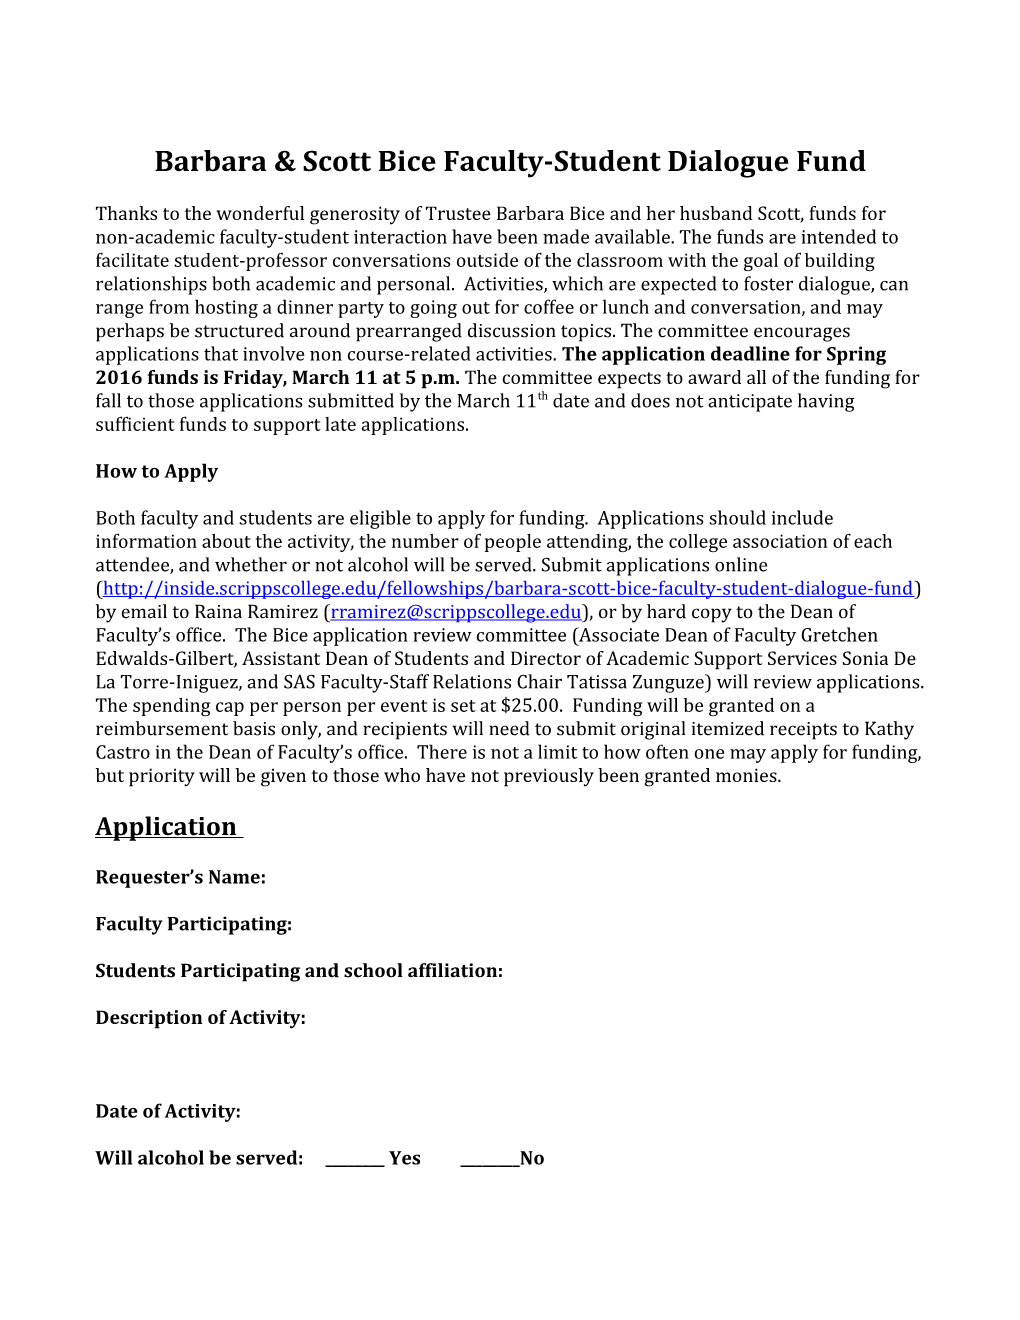 Barbara & Scott Bice Faculty-Student Dialogue Fund